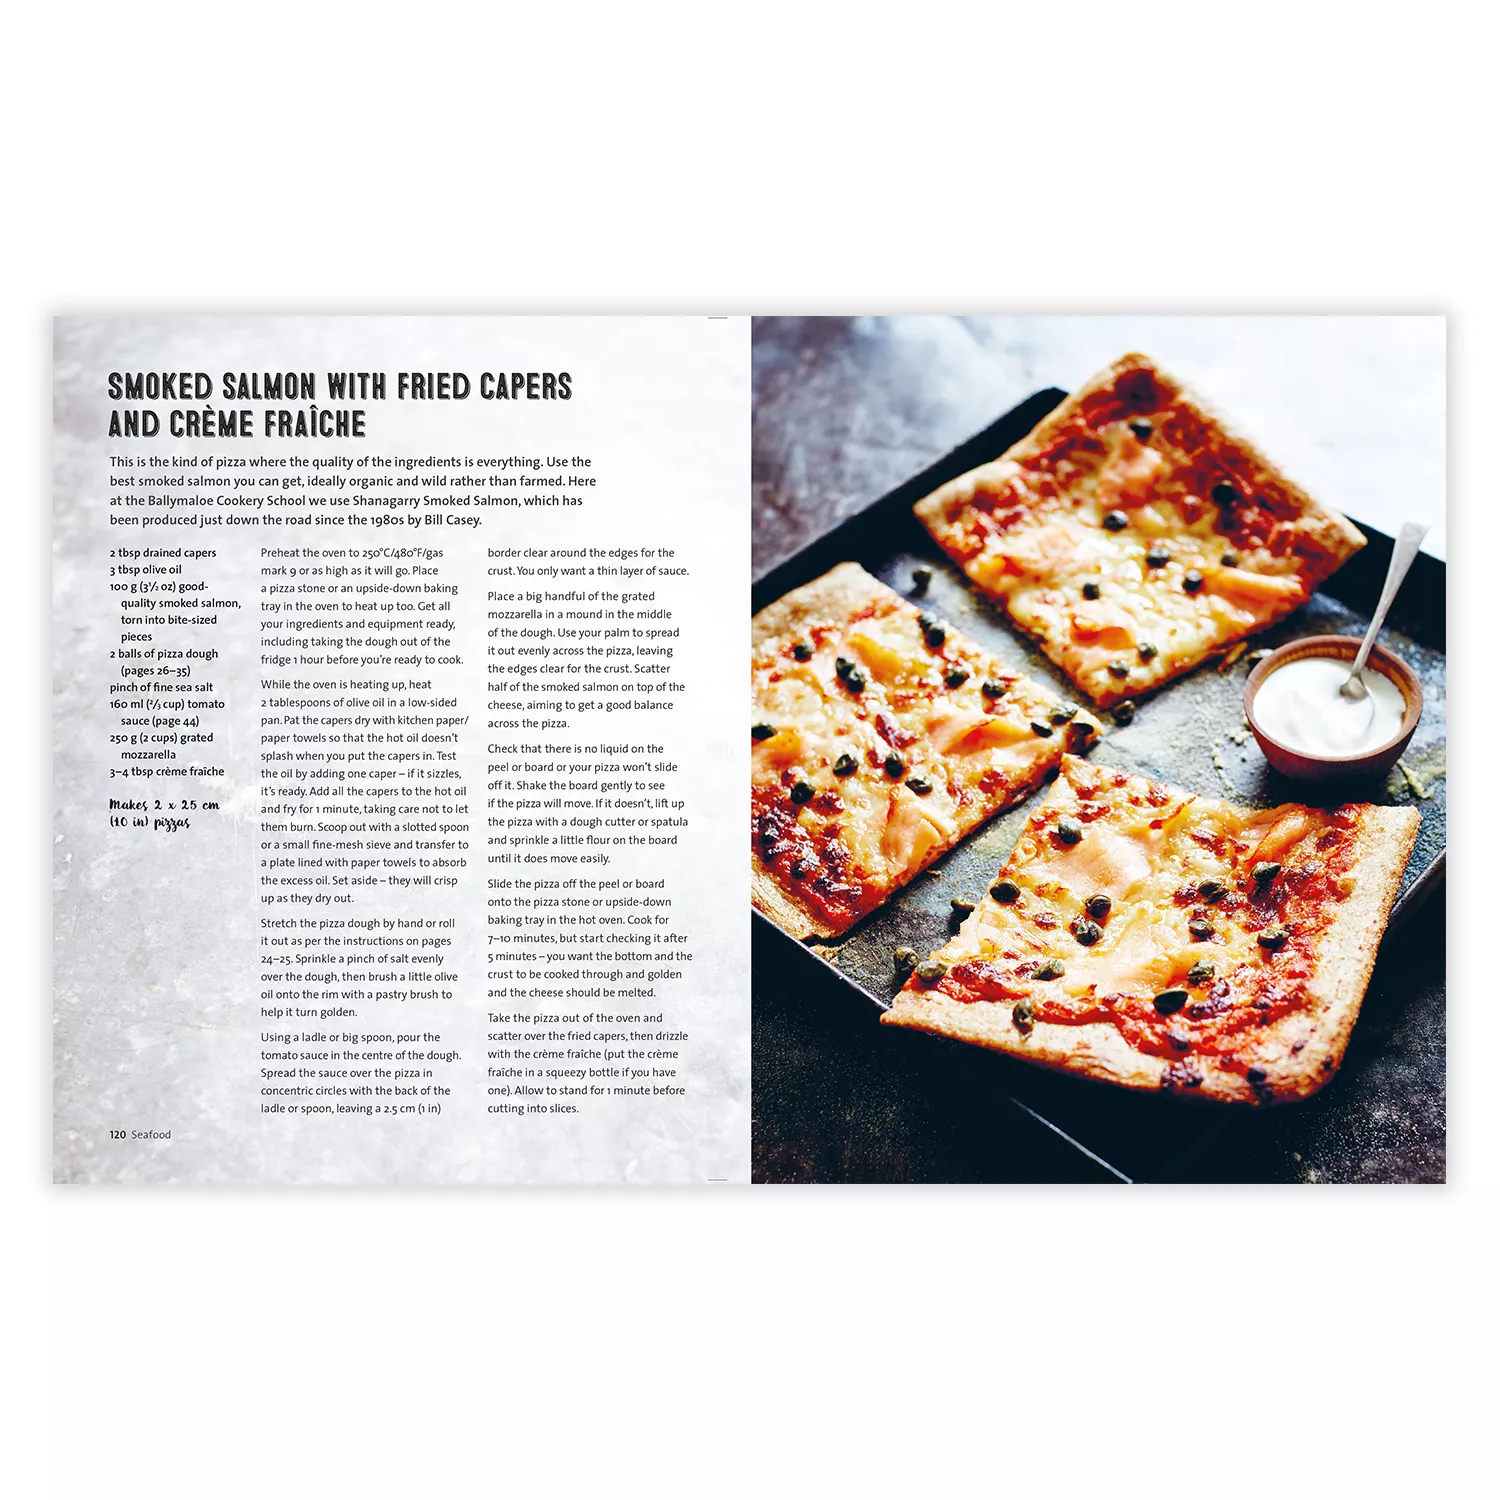 Making Artisan Pizza at Home: Over 90 Delicious Recipes for Bases & Seasonal Toppings